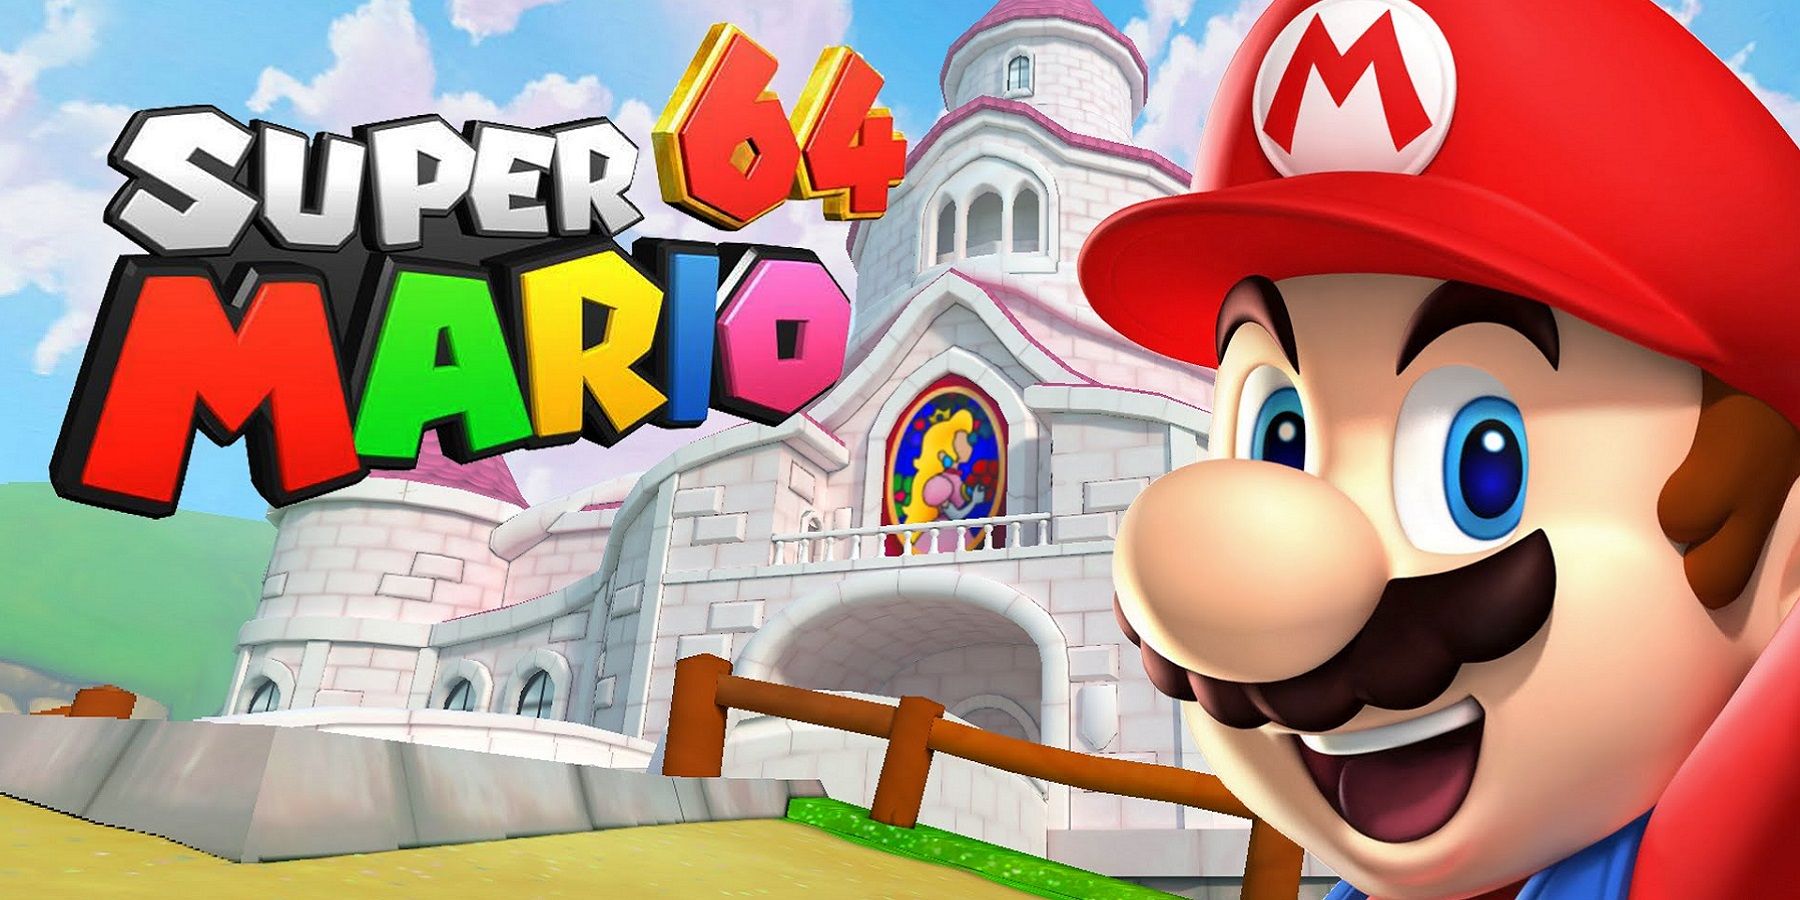 Image of Mario in front of Peach's castle with the Super Mario 64 logo to one side.